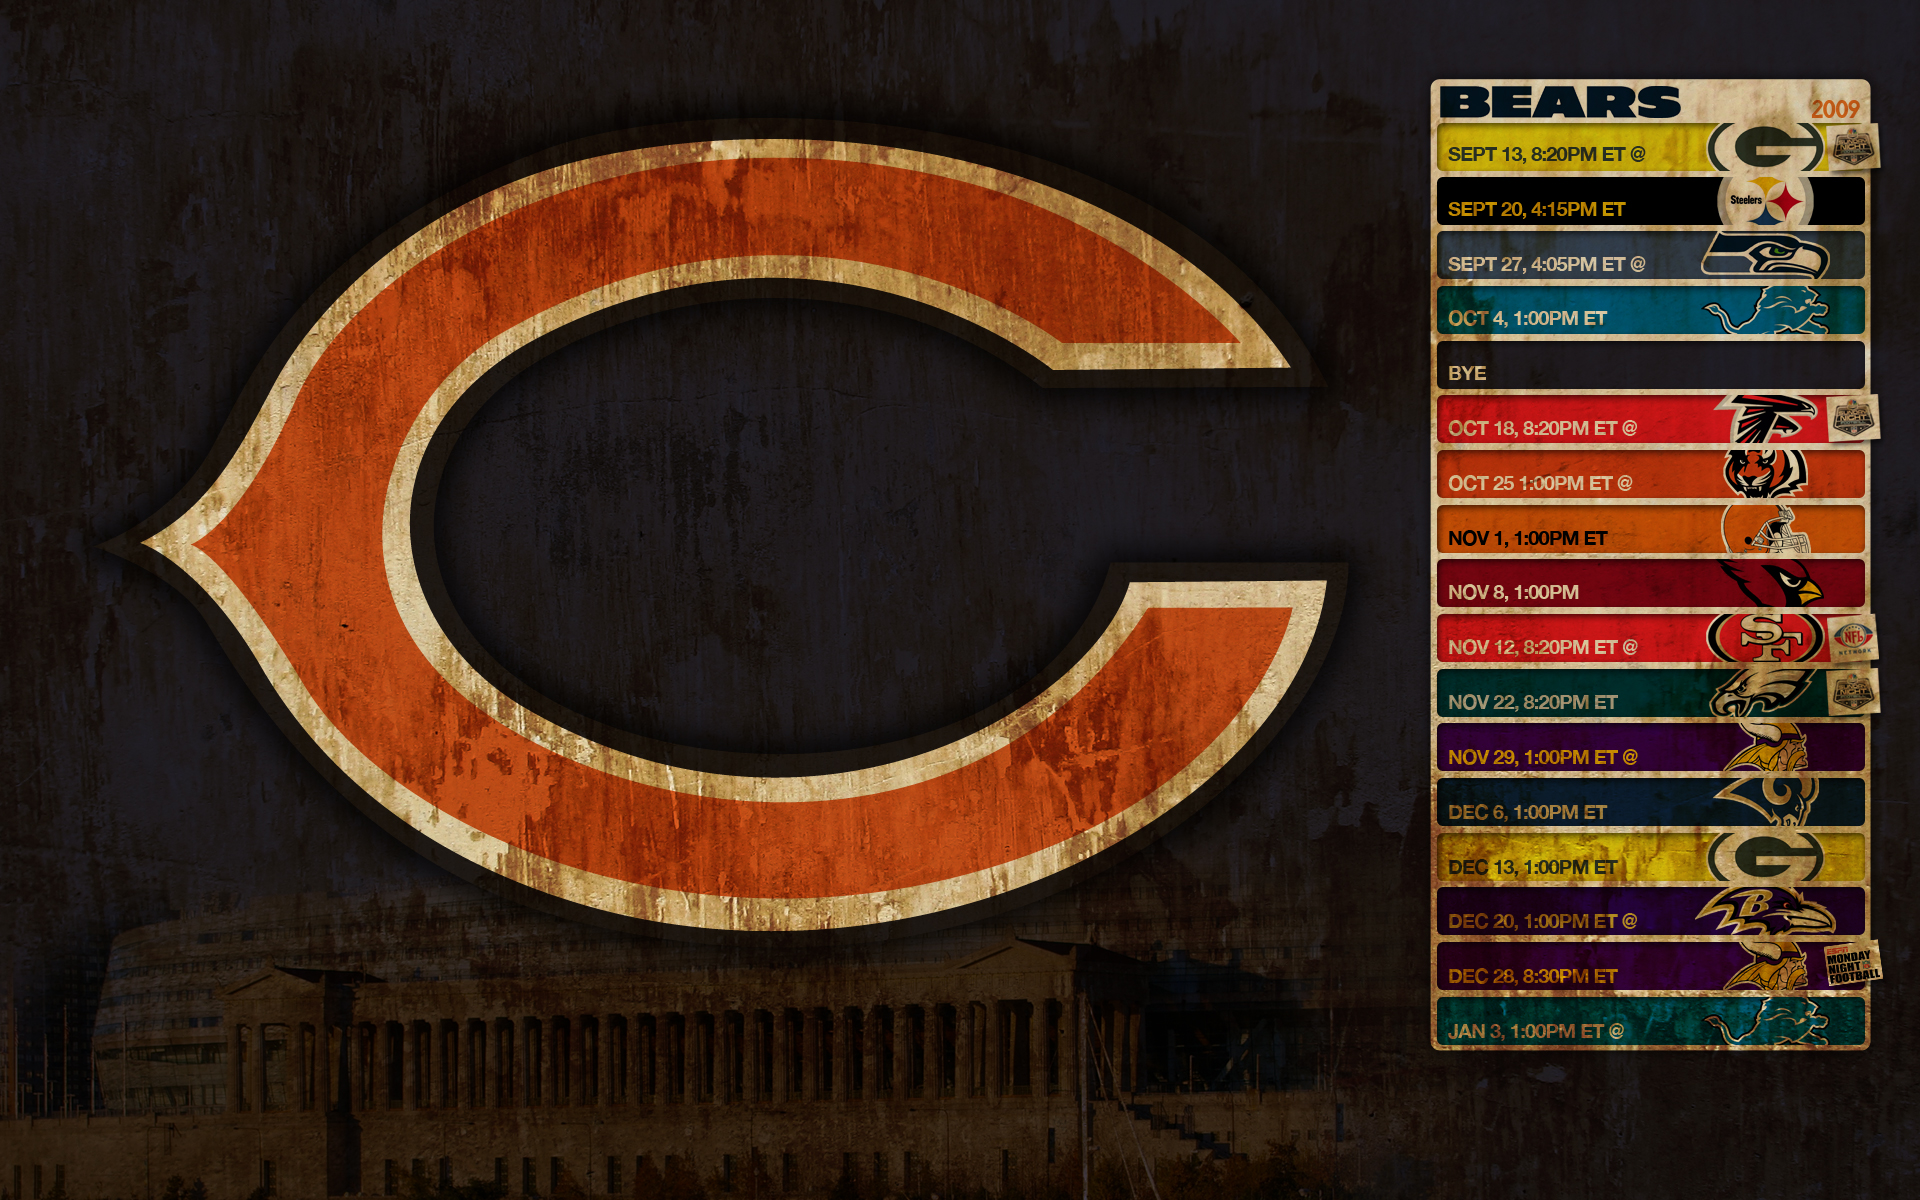 The best Chicago Bears wallpaper ever Chicago Bears wallpapers 1920x1200